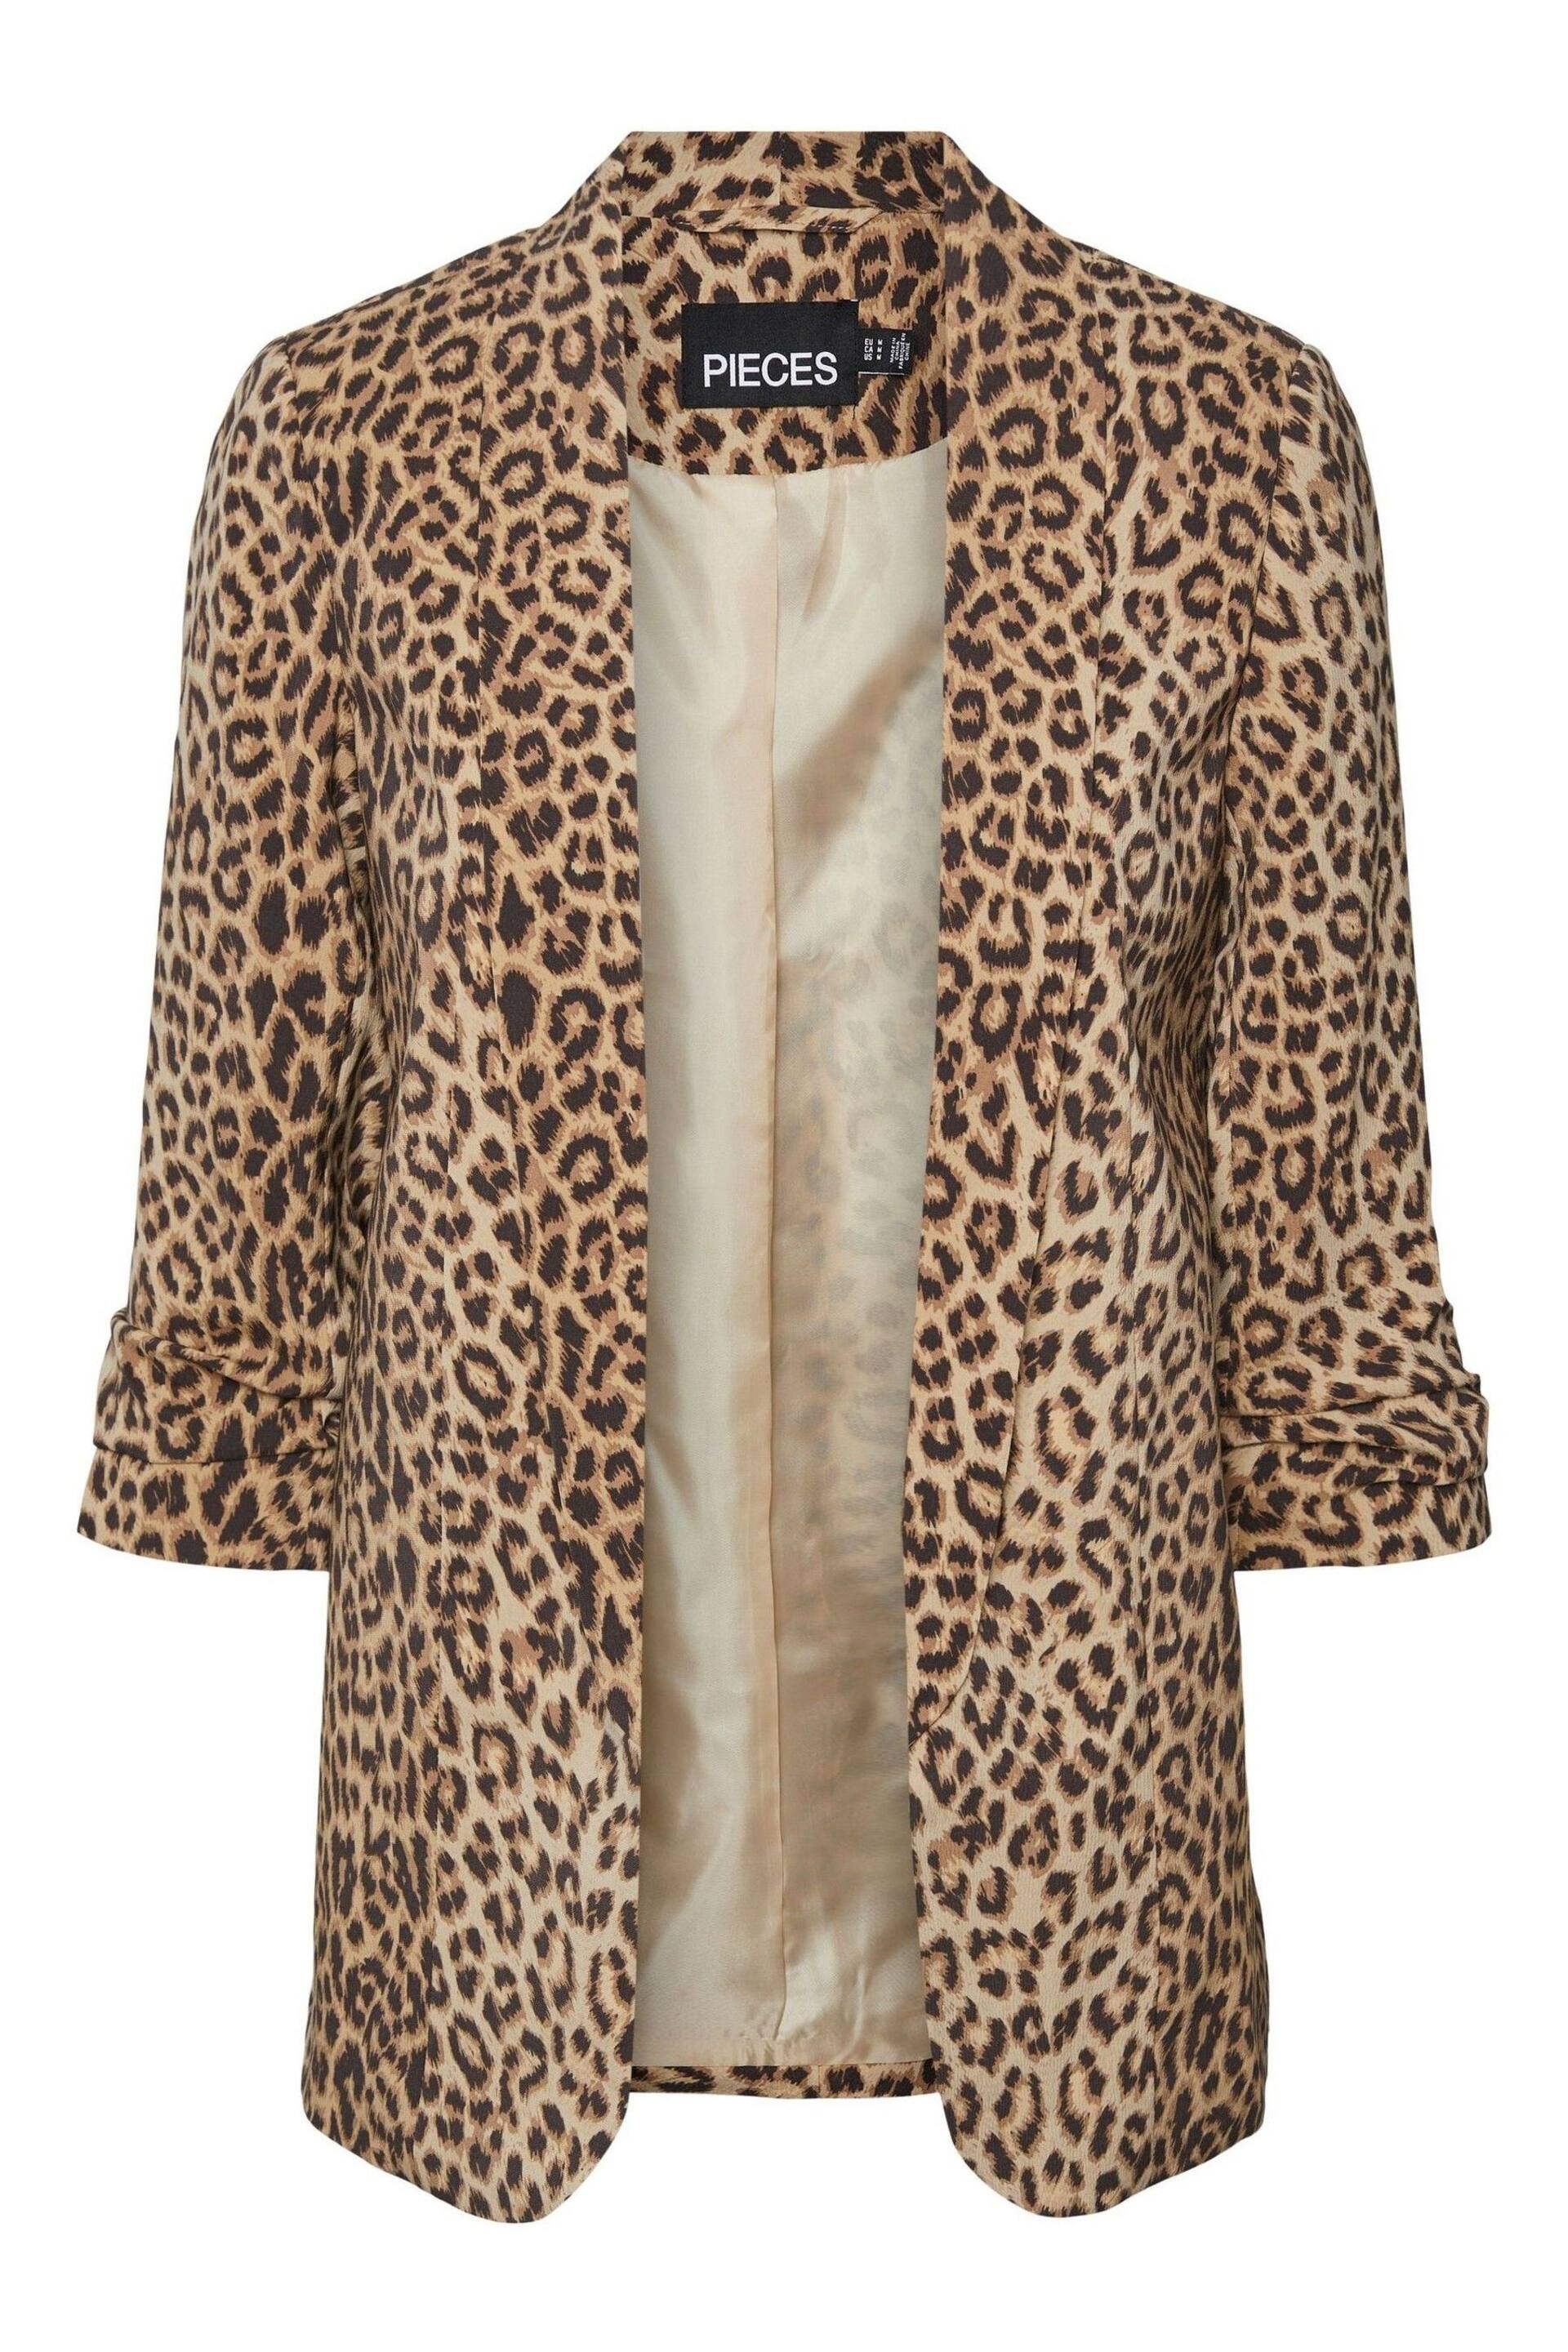 Pieces Leopard Print Relaxed Ruched Sleeve Workwear Blazer - Image 5 of 5